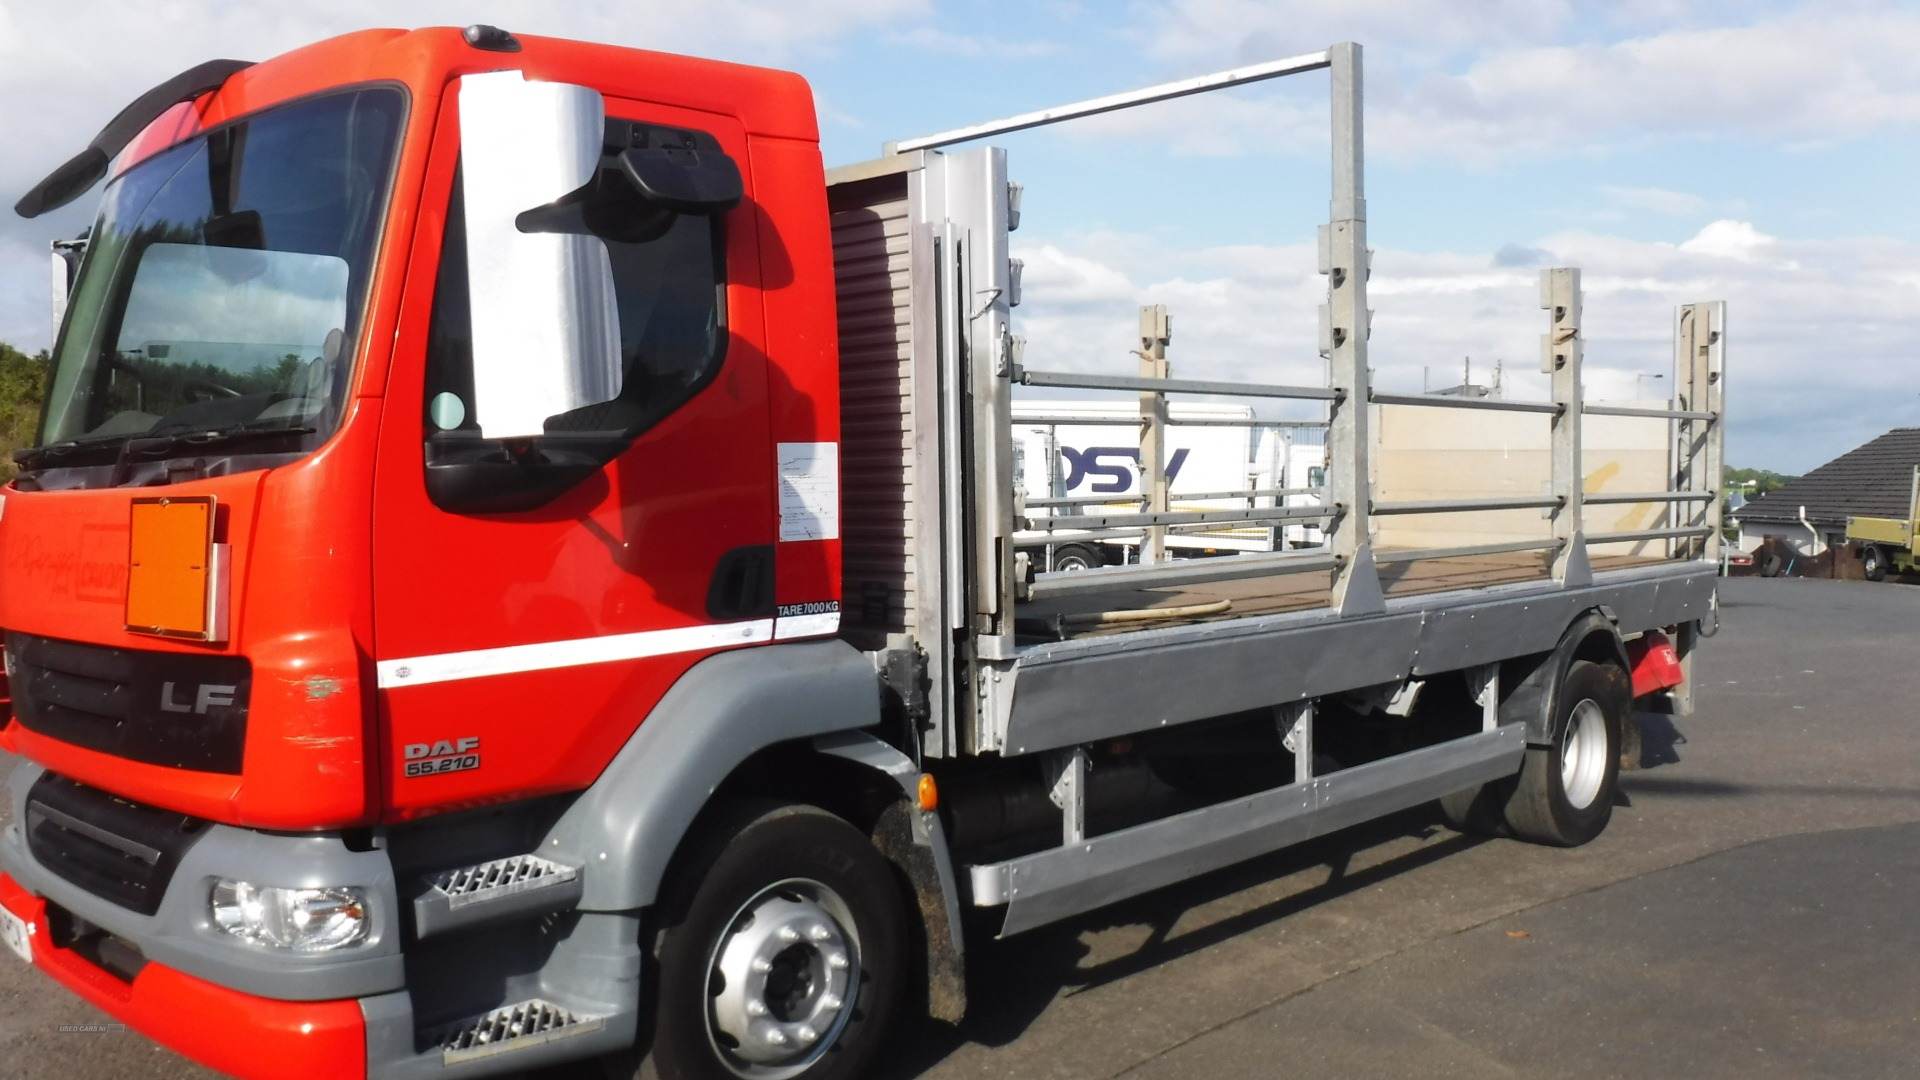 Daf LF55-210 19ft 8" flatbed 16 tonnes. with tail lift in Down